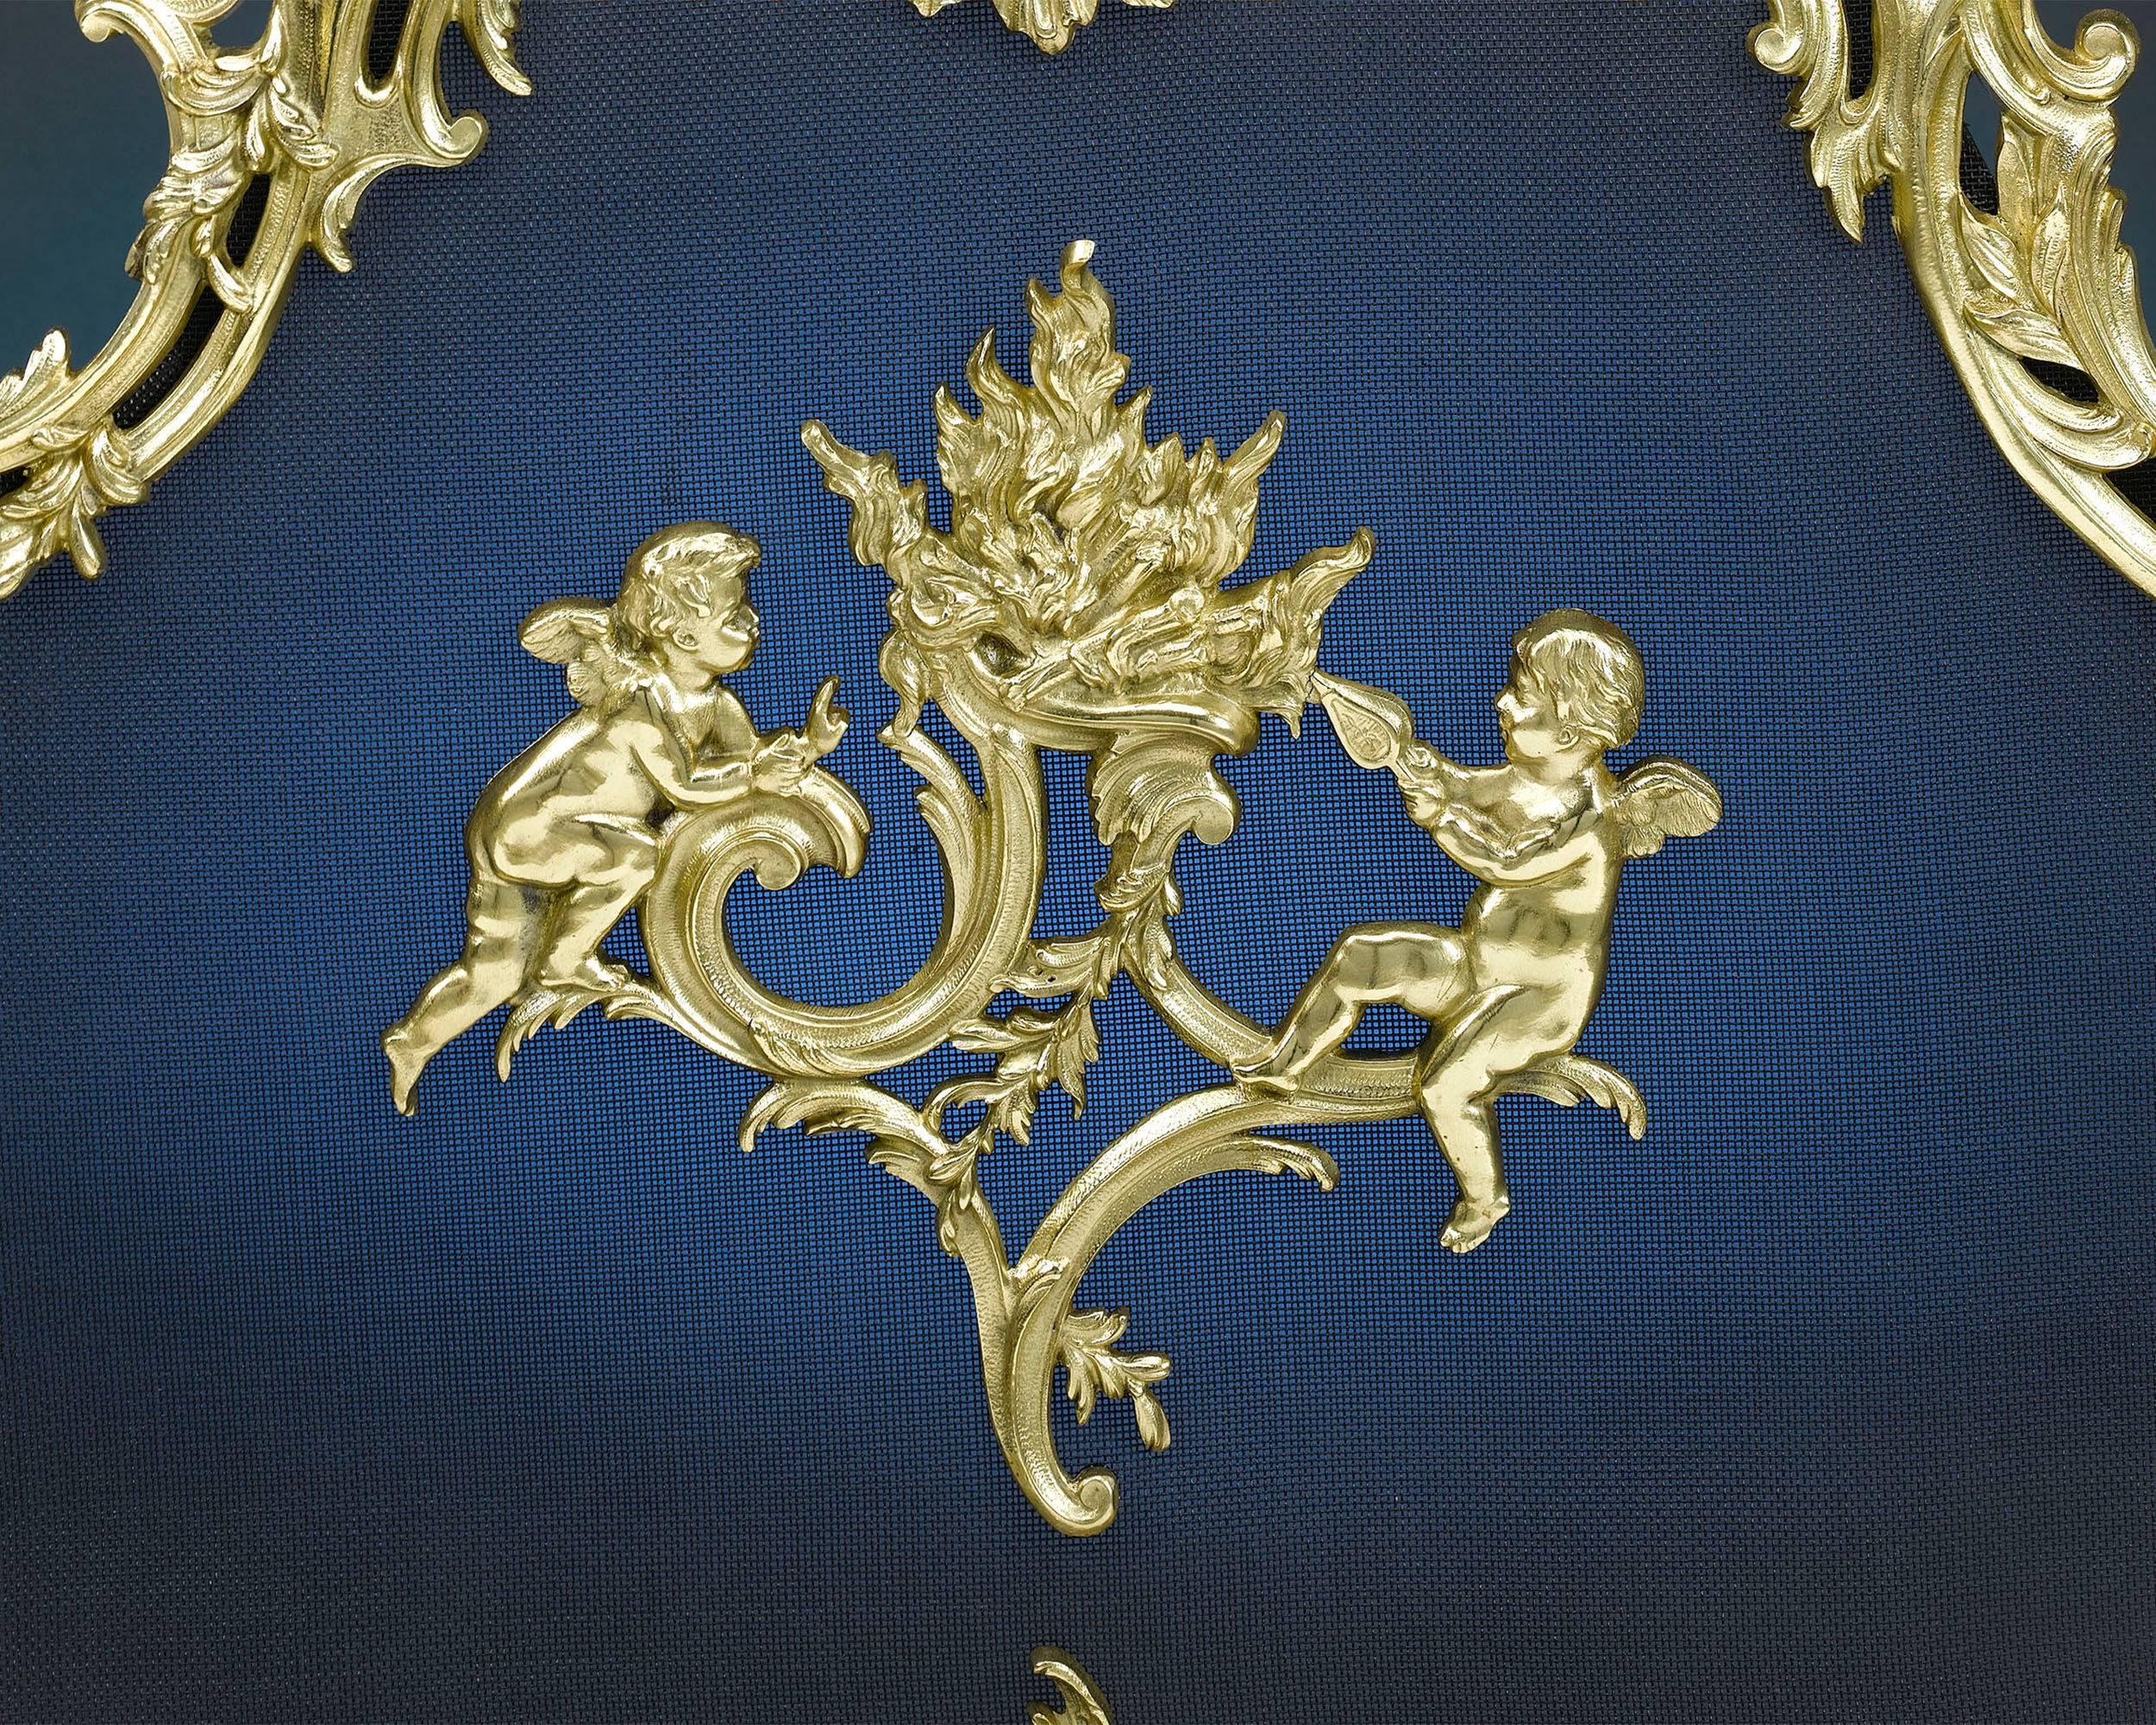 This exceptional gilt bronze and mesh French fire screen will add elegance to any hearth. The elegant Rococo style form is composed of detailed scrolls and vines, and the mesh panel centered with a playful gilt bronze putti appliqué. A foliate cast